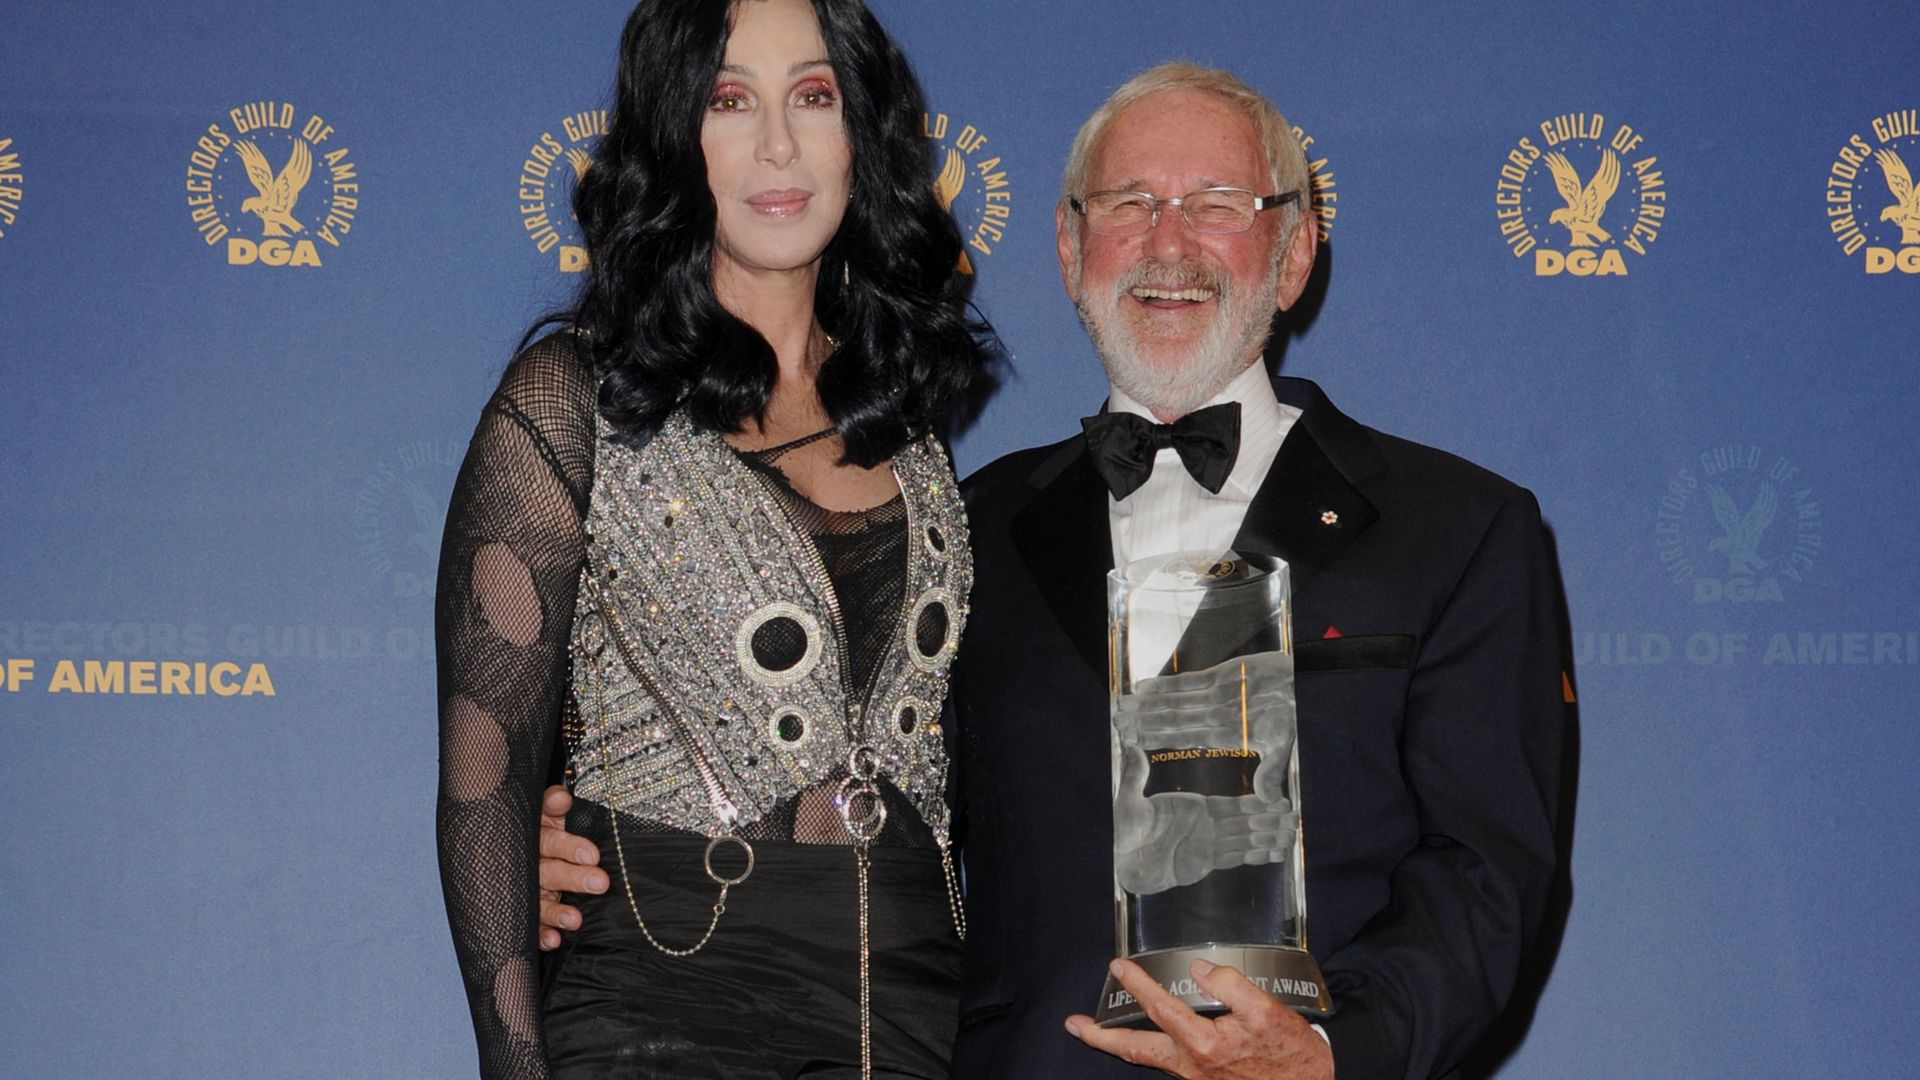 Cher shares heartfelt tribute to late Moonstruck director Norman Jewison